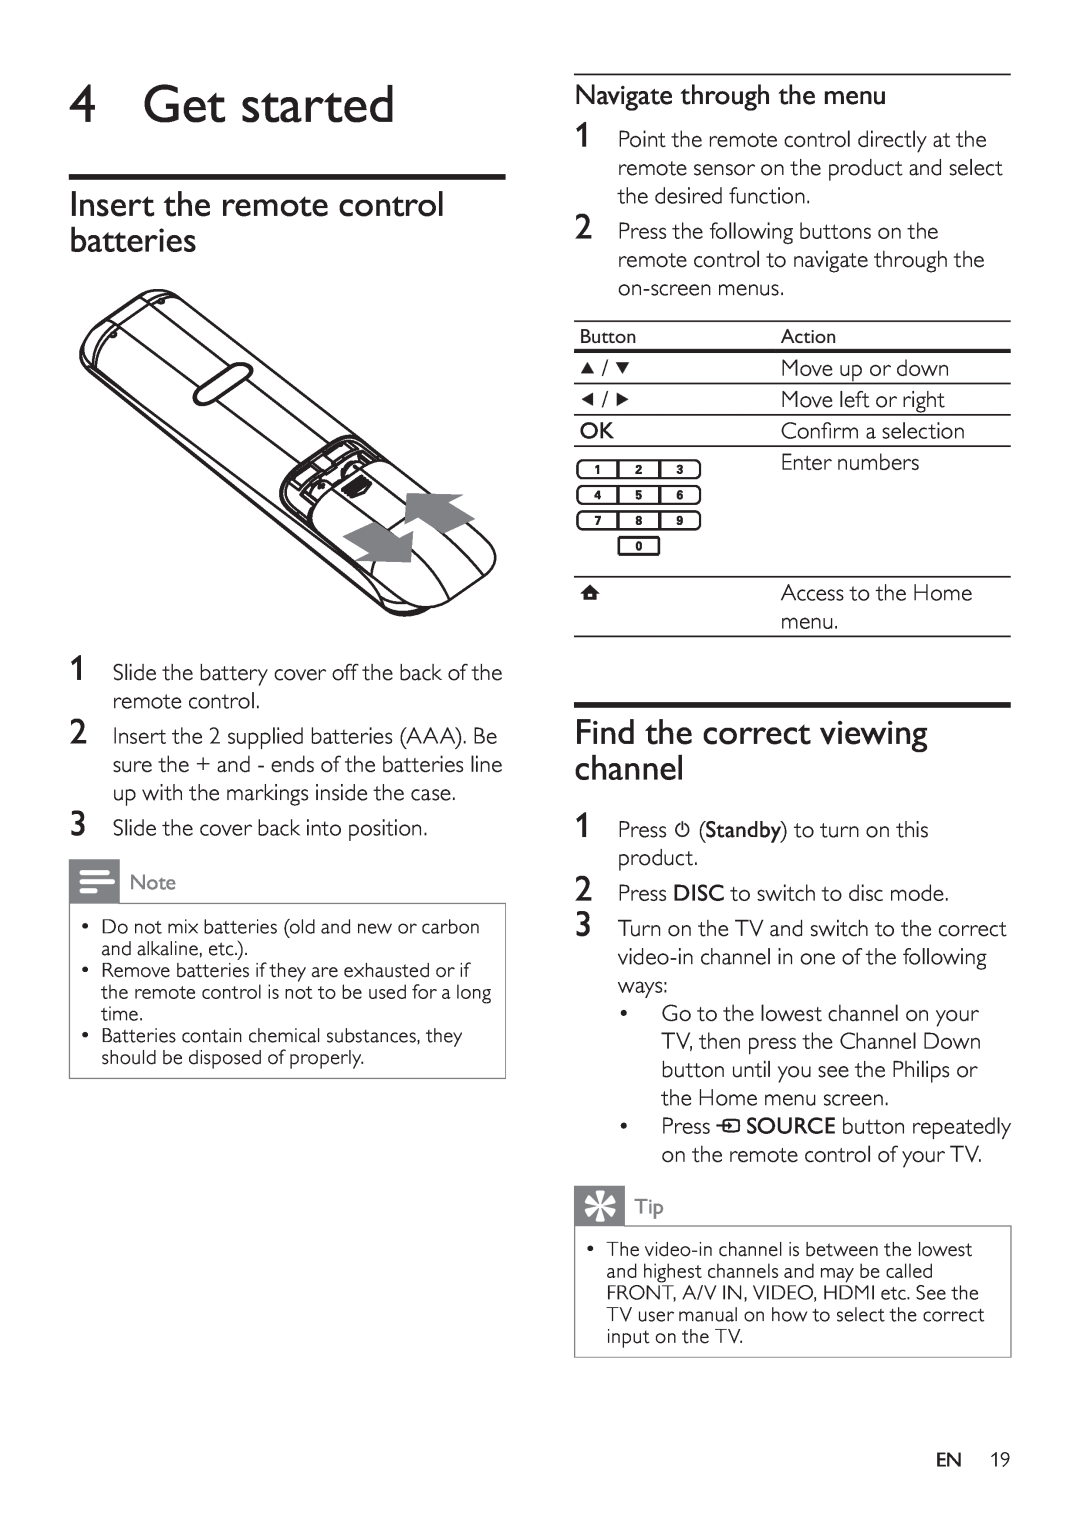 Philips HTS7520, HTS7500 user manual Get started, Insert the remote control batteries, Find the correct viewing channel 